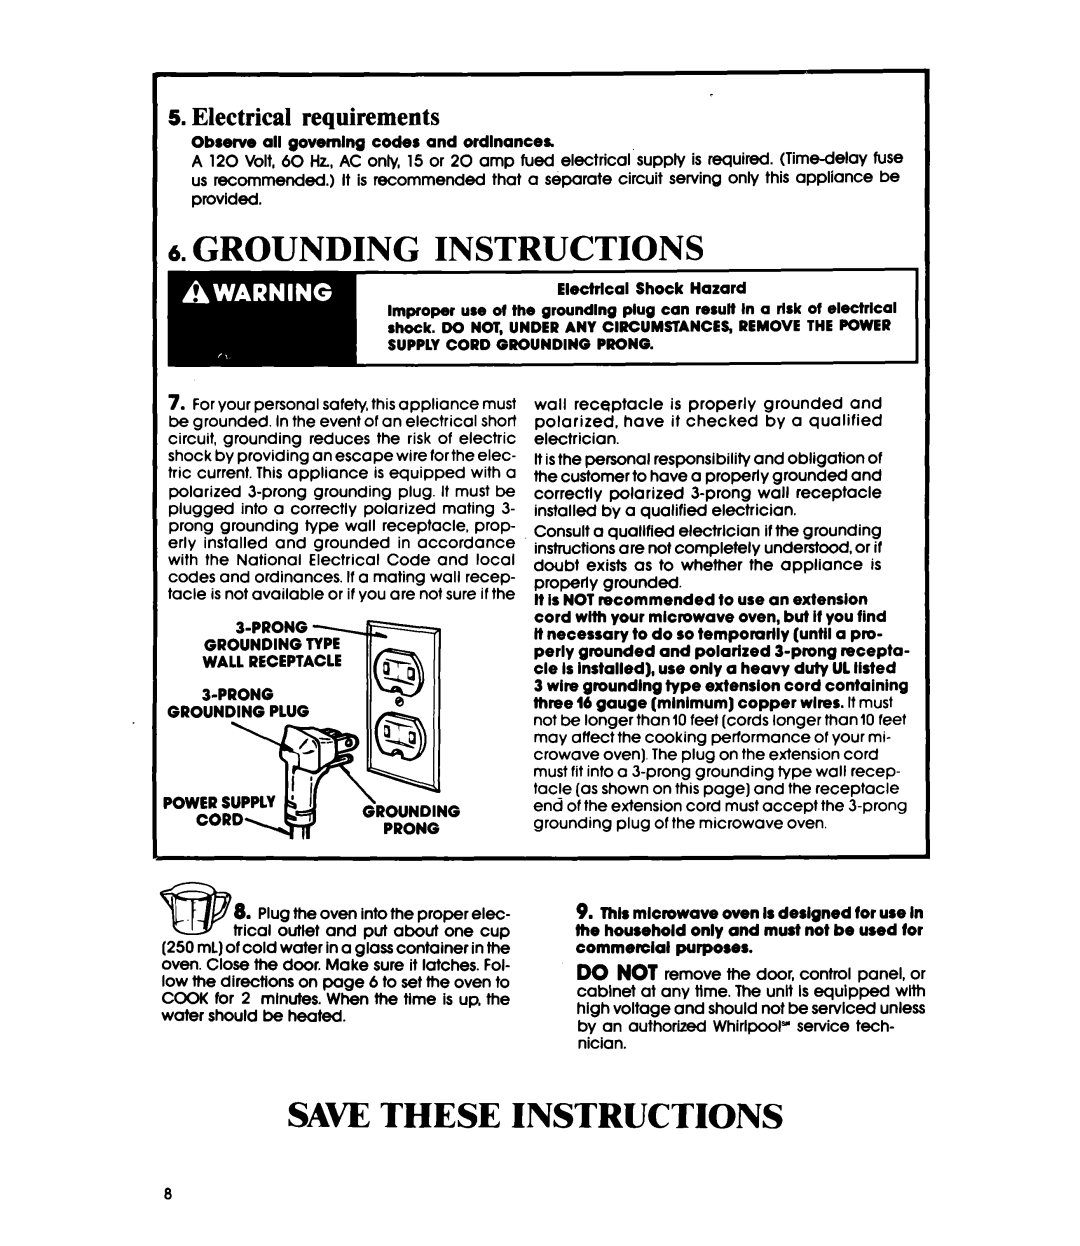 Whirlpool MW1200XW manual Grounding Instructions, Saw These Instructions, Electrical requirements, II-2 